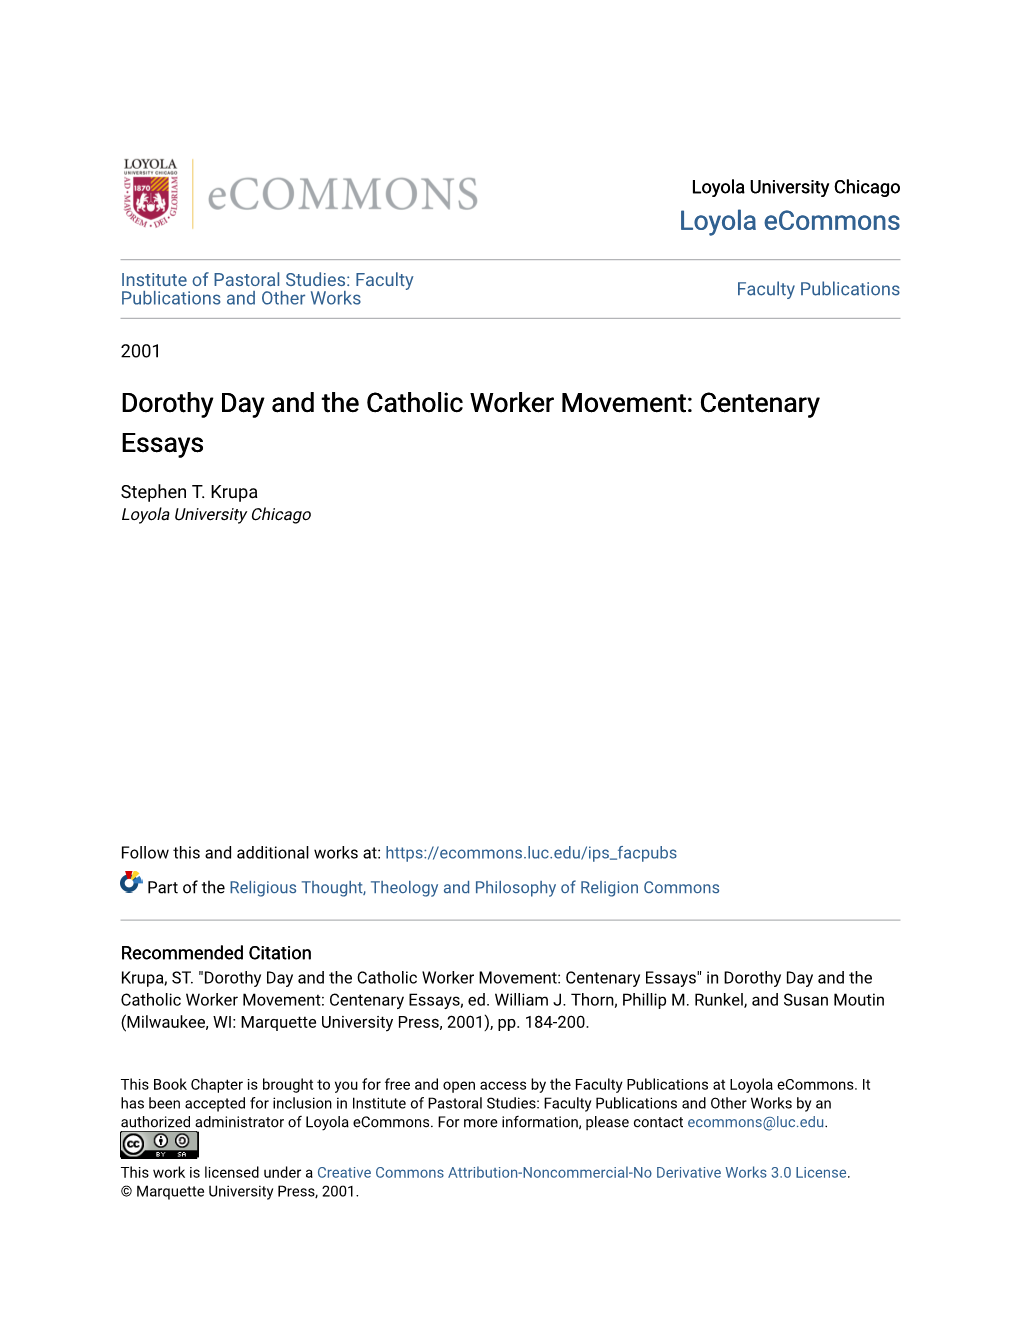 Dorothy Day and the Catholic Worker Movement: Centenary Essays